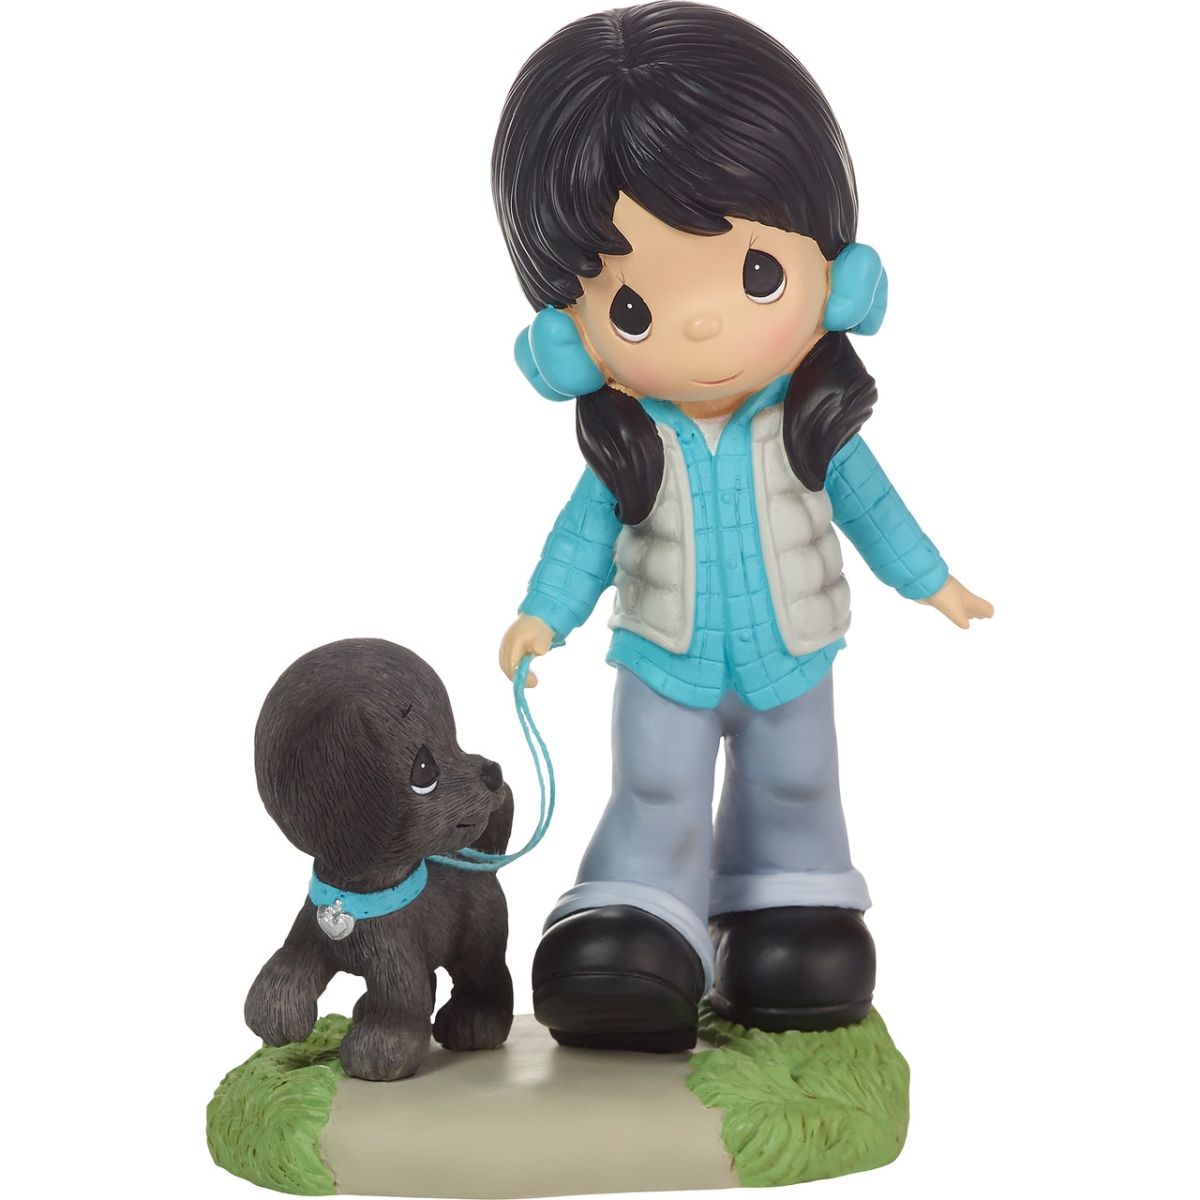 Picture of Be the Light Christian Bookstore 226401 5.5 in. Resin Girl Figurine with Black Labrador Retriever, Multi Color